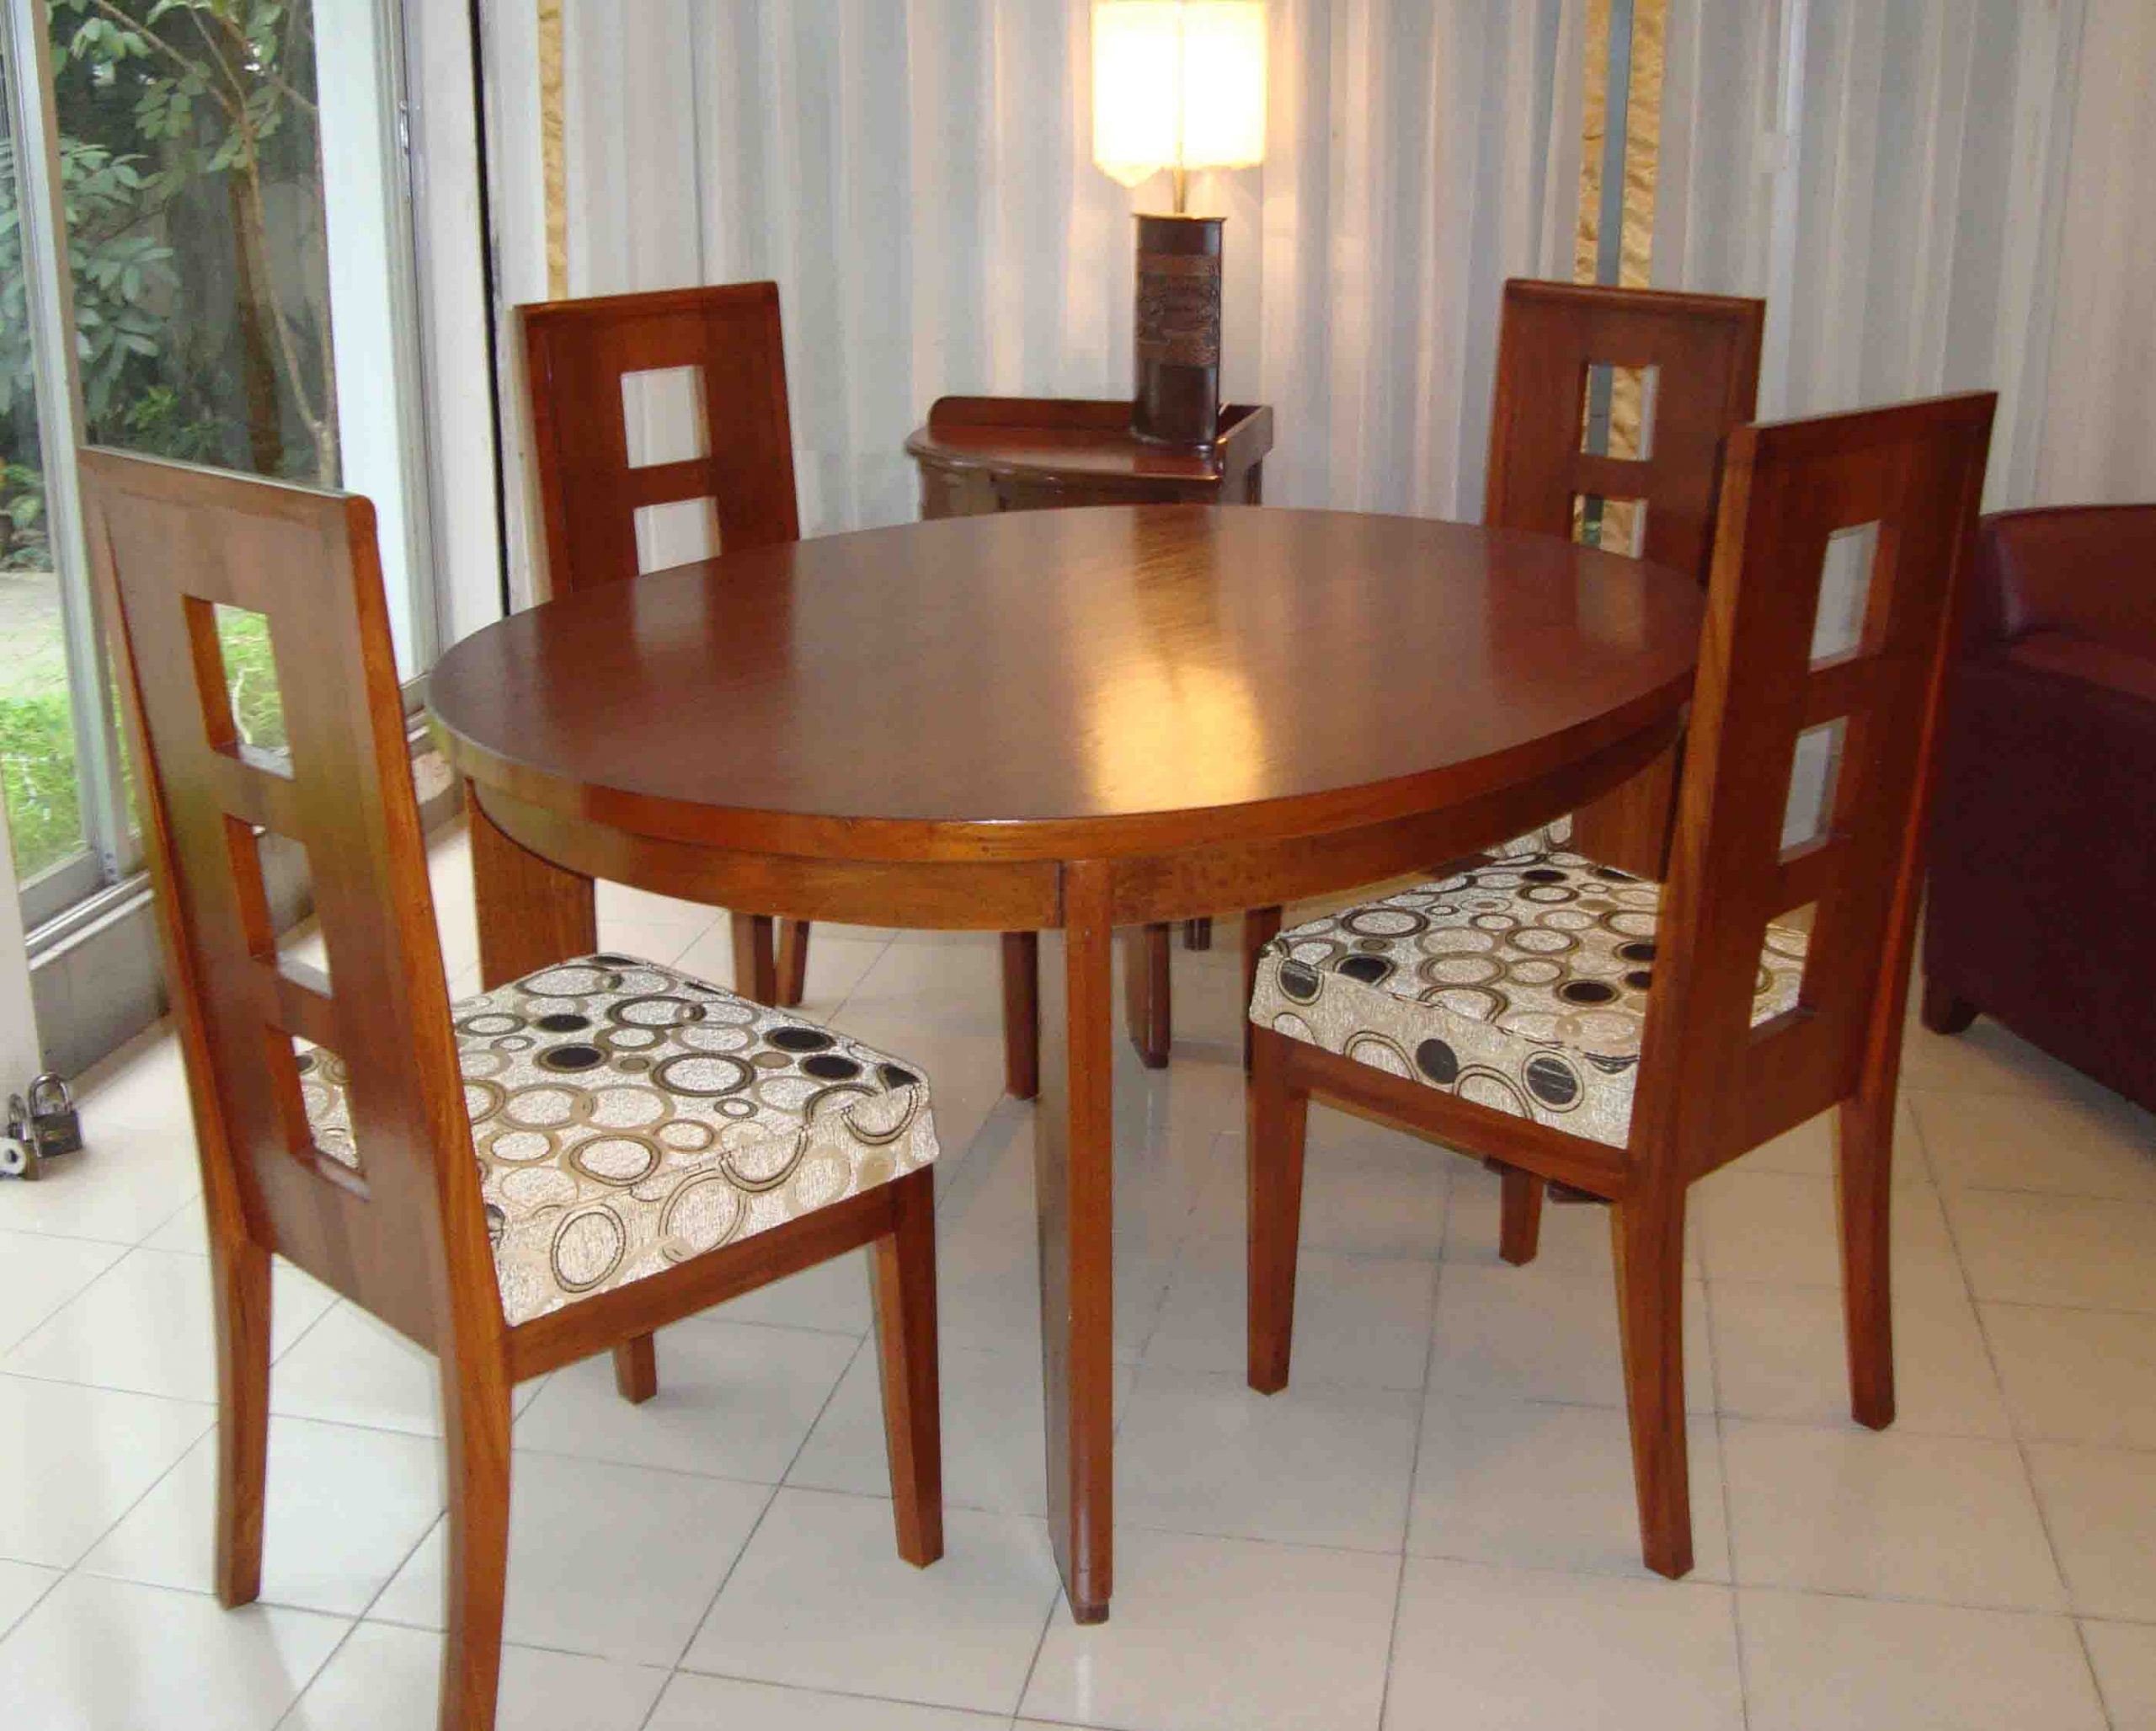 Nza Dining Table With 4 Chairs Made Of Solid Wood Clickbd throughout dimensions 2796 X 2244